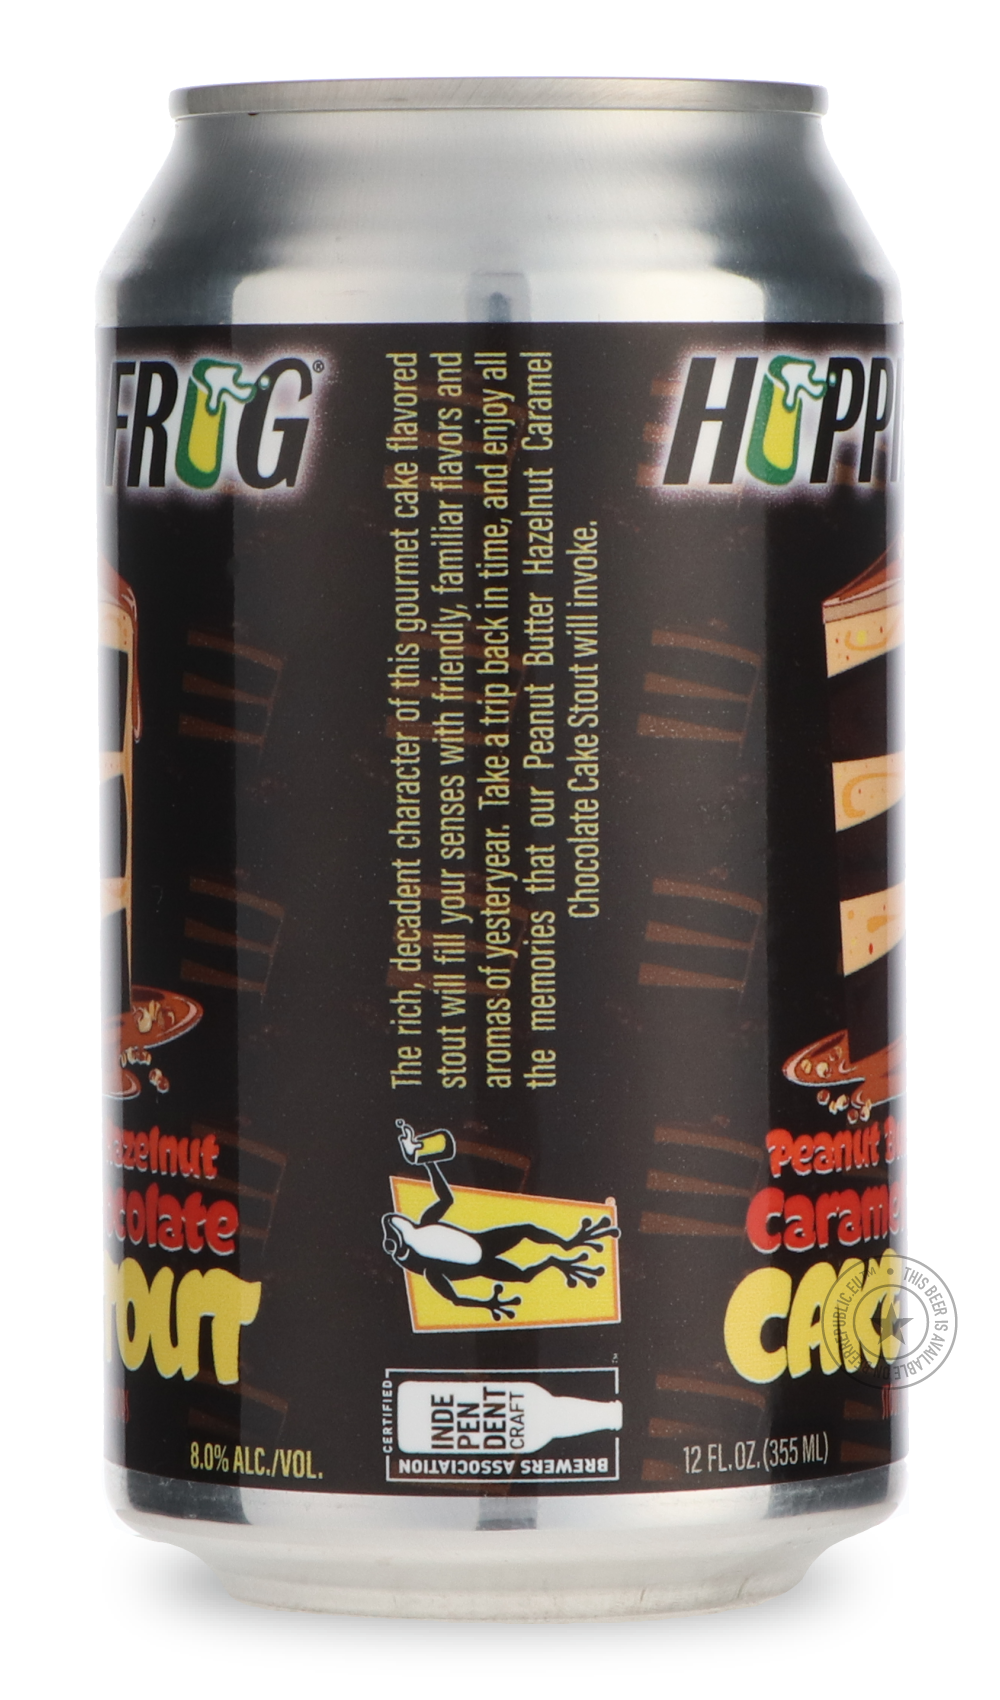 -Hoppin' Frog- Peanut Butter Hazelnut Caramel Chocolate Cake Stout-Stout & Porter- Only @ Beer Republic - The best online beer store for American & Canadian craft beer - Buy beer online from the USA and Canada - Bier online kopen - Amerikaans bier kopen - Craft beer store - Craft beer kopen - Amerikanisch bier kaufen - Bier online kaufen - Acheter biere online - IPA - Stout - Porter - New England IPA - Hazy IPA - Imperial Stout - Barrel Aged - Barrel Aged Imperial Stout - Brown - Dark beer - Blond - Blonde 